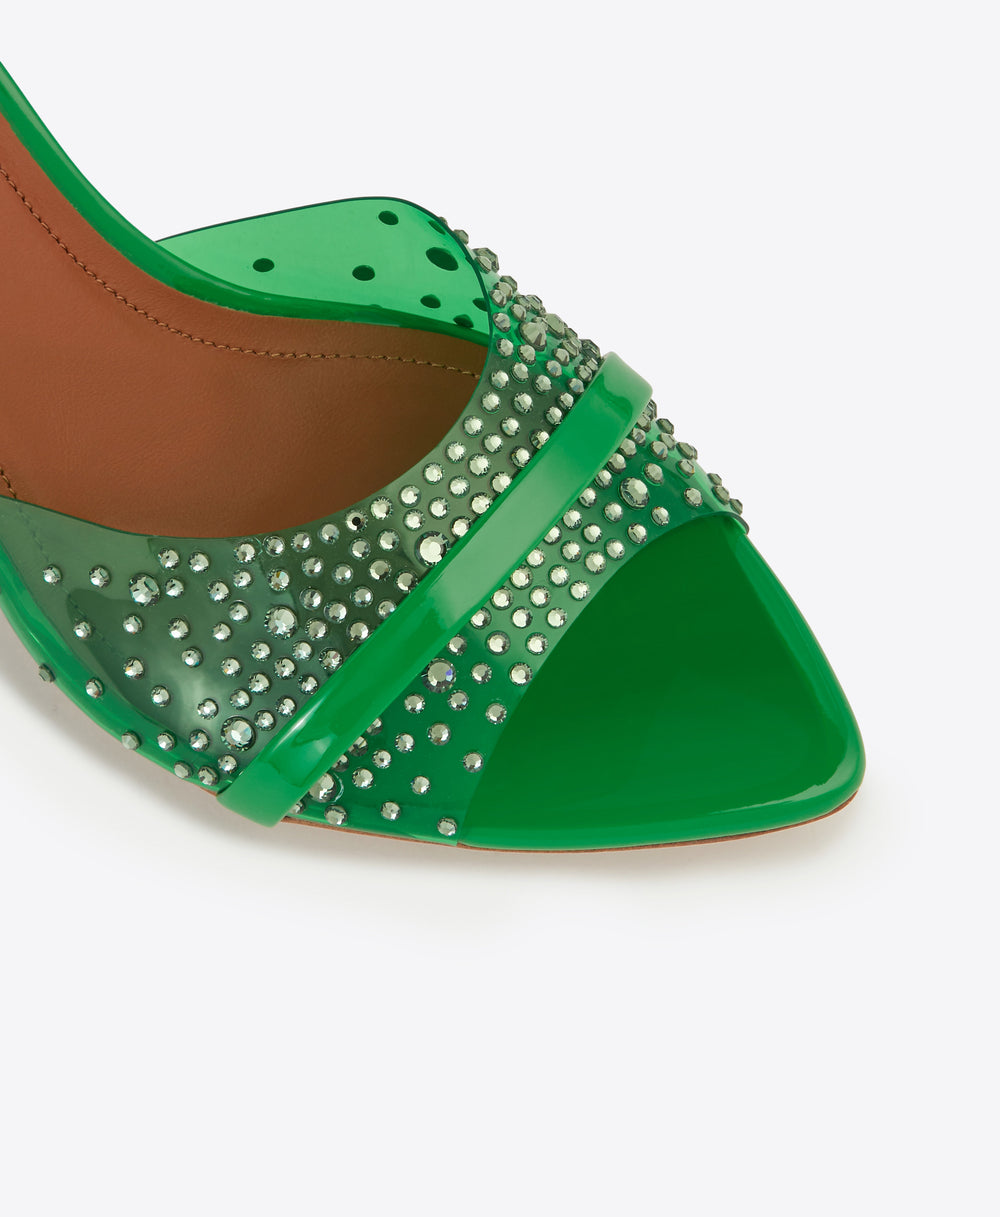 Women's Green PVC with Crystals Heeled Sandals Malone Souliers